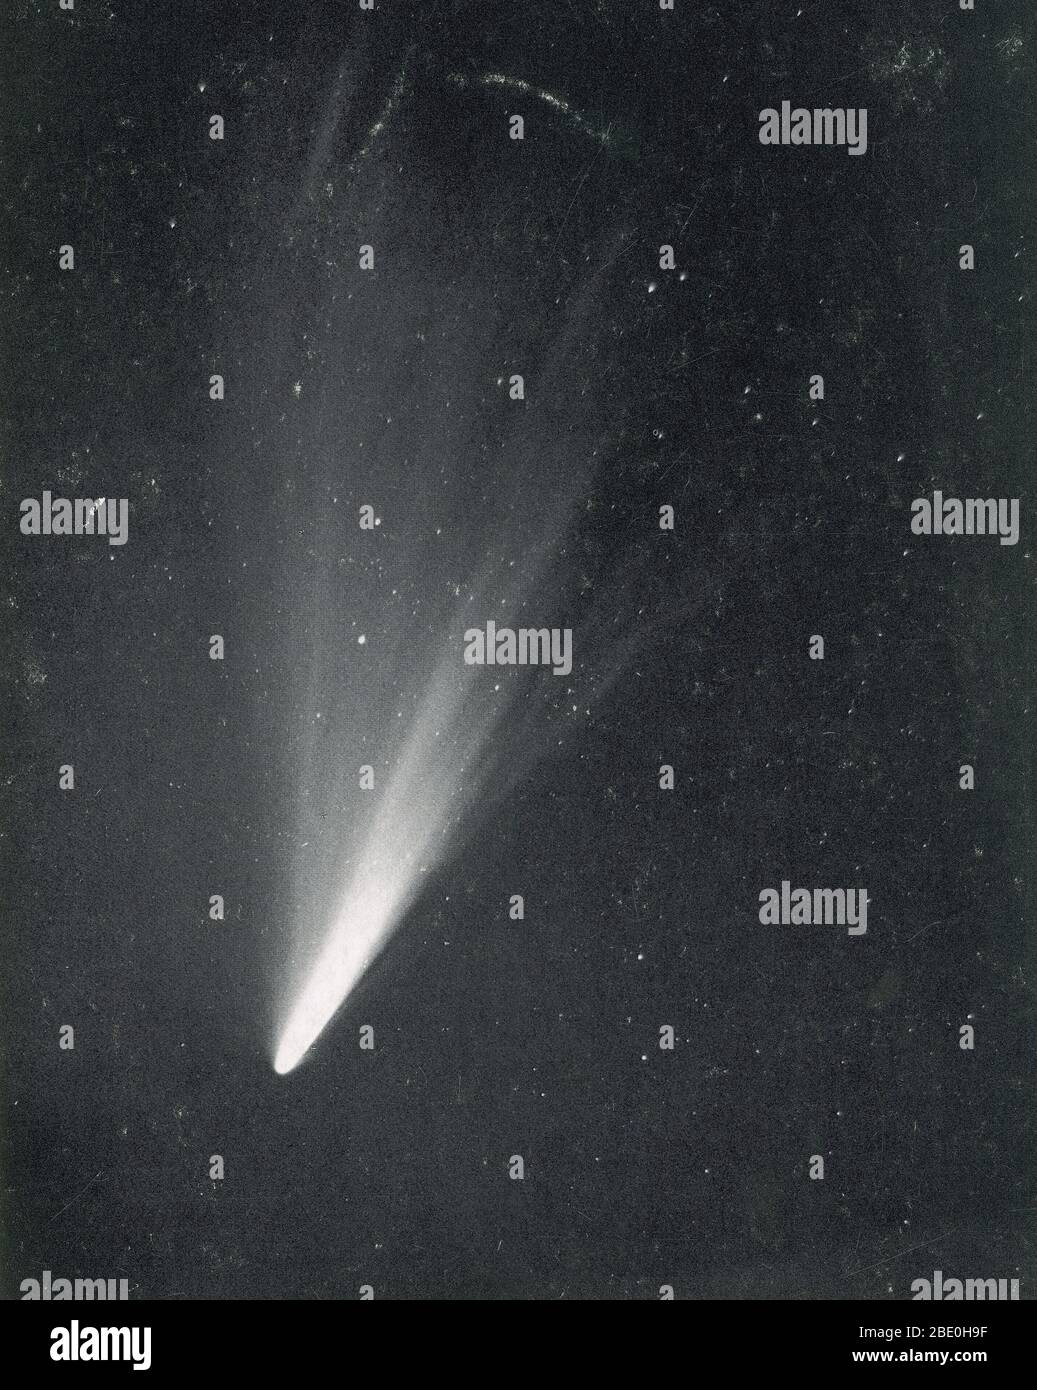 Comet West as photographed from the Lick Observatory in 1976 March. Comet West, officially known as C/1975 V1, 1976 VI, and 1975n, was an awesome comet that was sometimes considered to qualify for the status of great comet. A Great Comet is a comet that becomes exceptionally bright; there is no official definition, often the term will be attached to comets that become bright enough to be noticed by casual observers who are not actively looking for them, and become well known outside the astronomical community. Great Comets are rare; on average only one will appear in a decade. While comets are Stock Photo